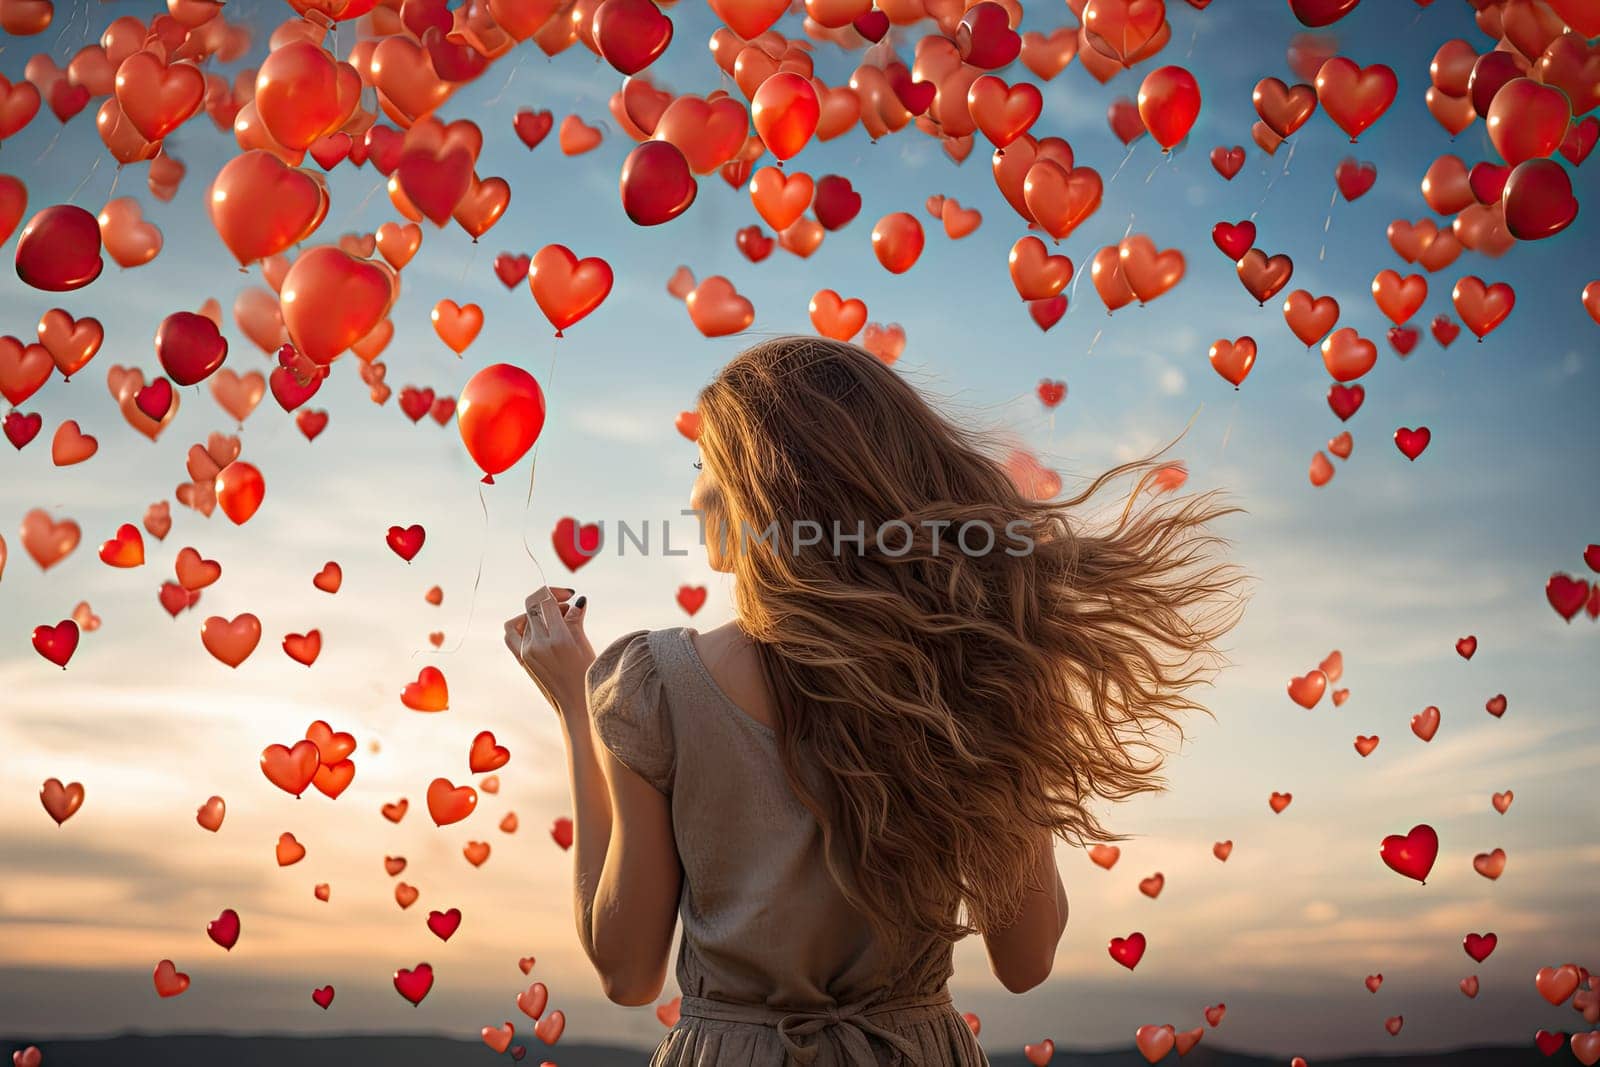 a woman with her hair blowing in the wind while she is surrounded by many red hearts floating in the air